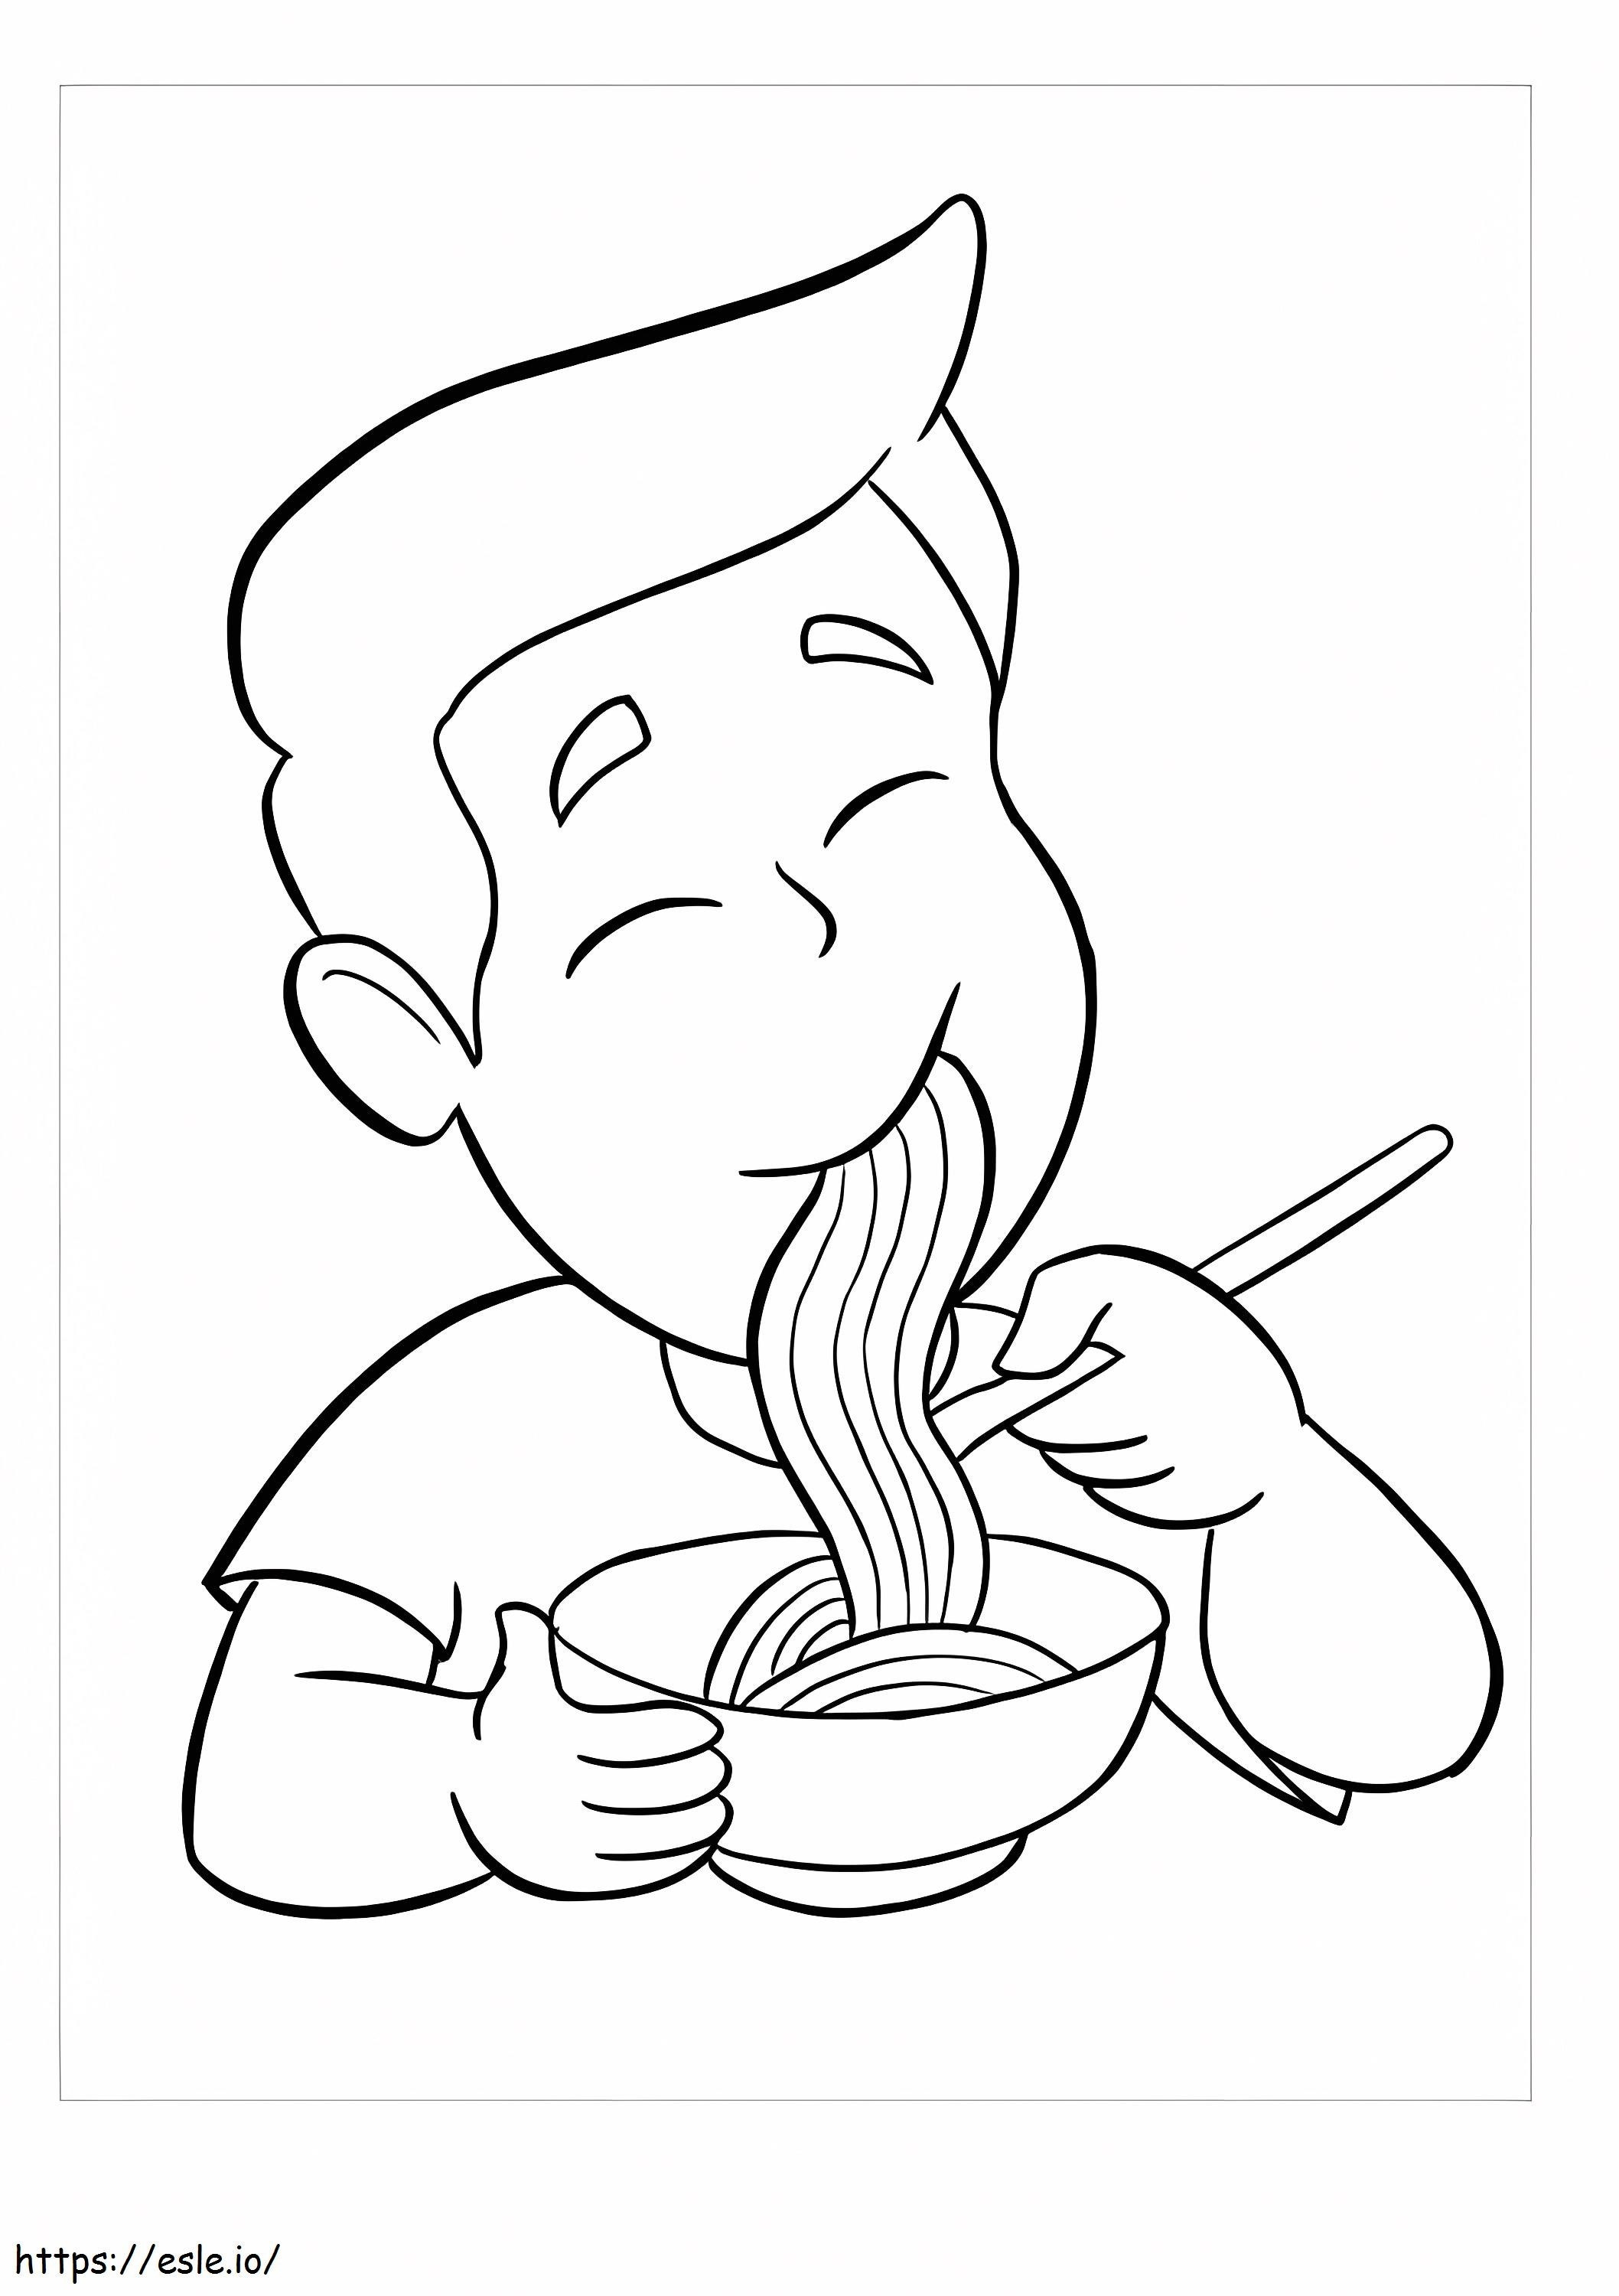 Boy Eating Pasta coloring page